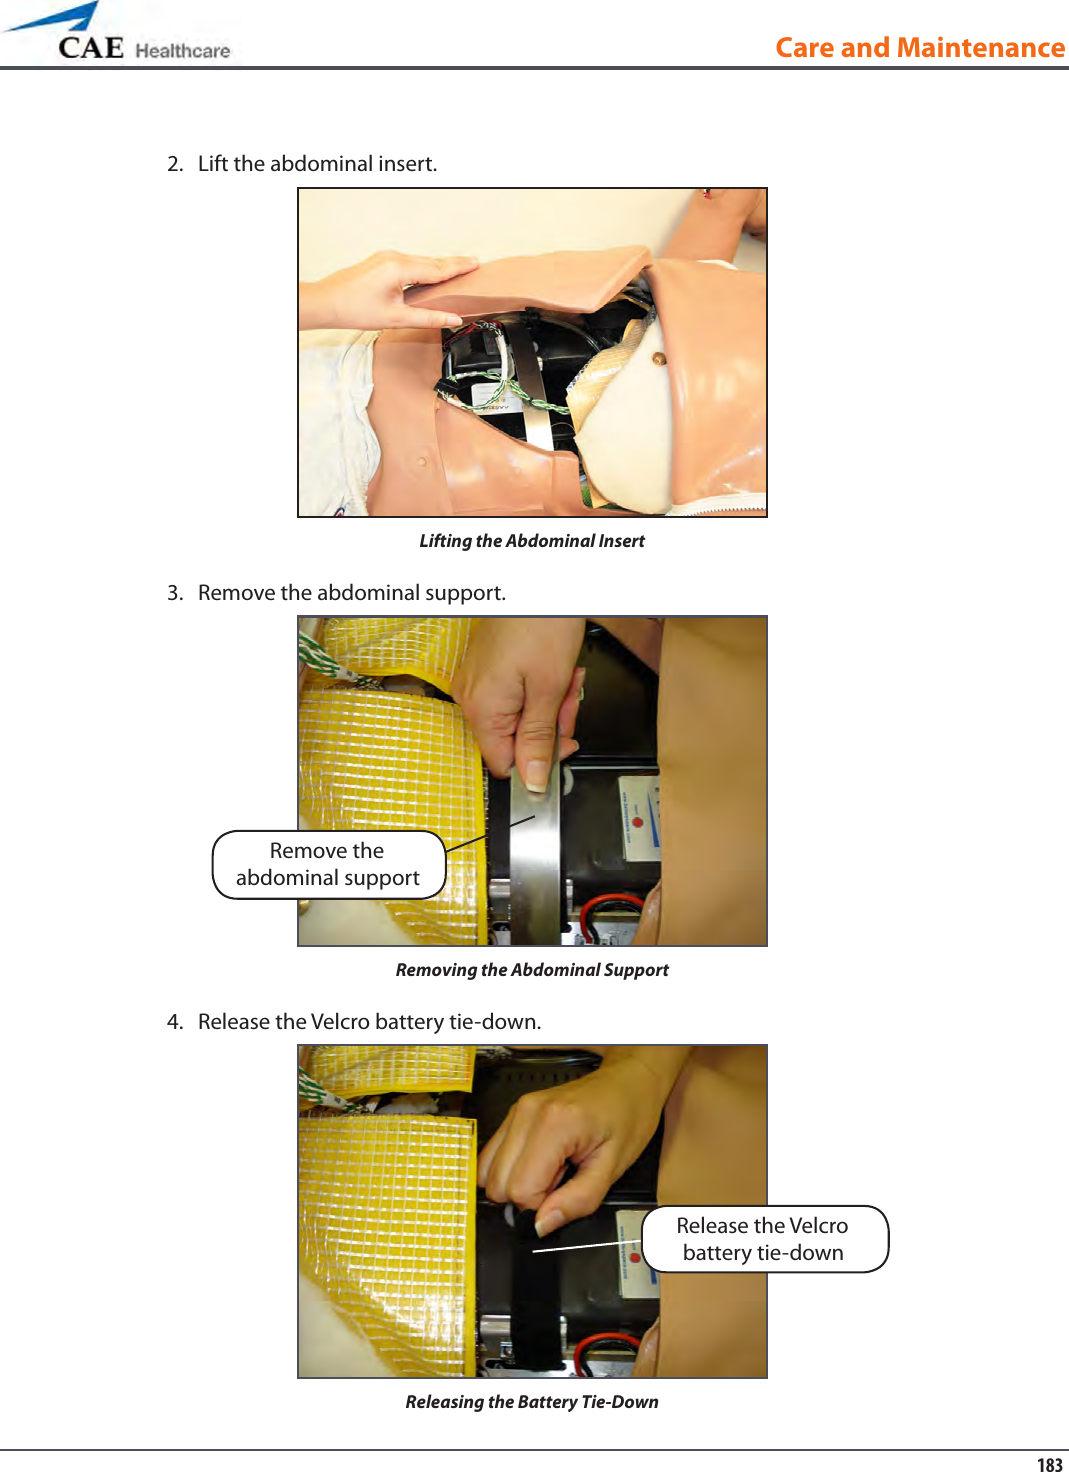 183Care and MaintenanceLift the abdominal insert.2. Lifting the Abdominal InsertRemove the abdominal support.3. Removing the Abdominal SupportRelease the Velcro battery tie-down.4. Releasing the Battery Tie-Down Remove the abdominal supportRelease the Velcro battery tie-down